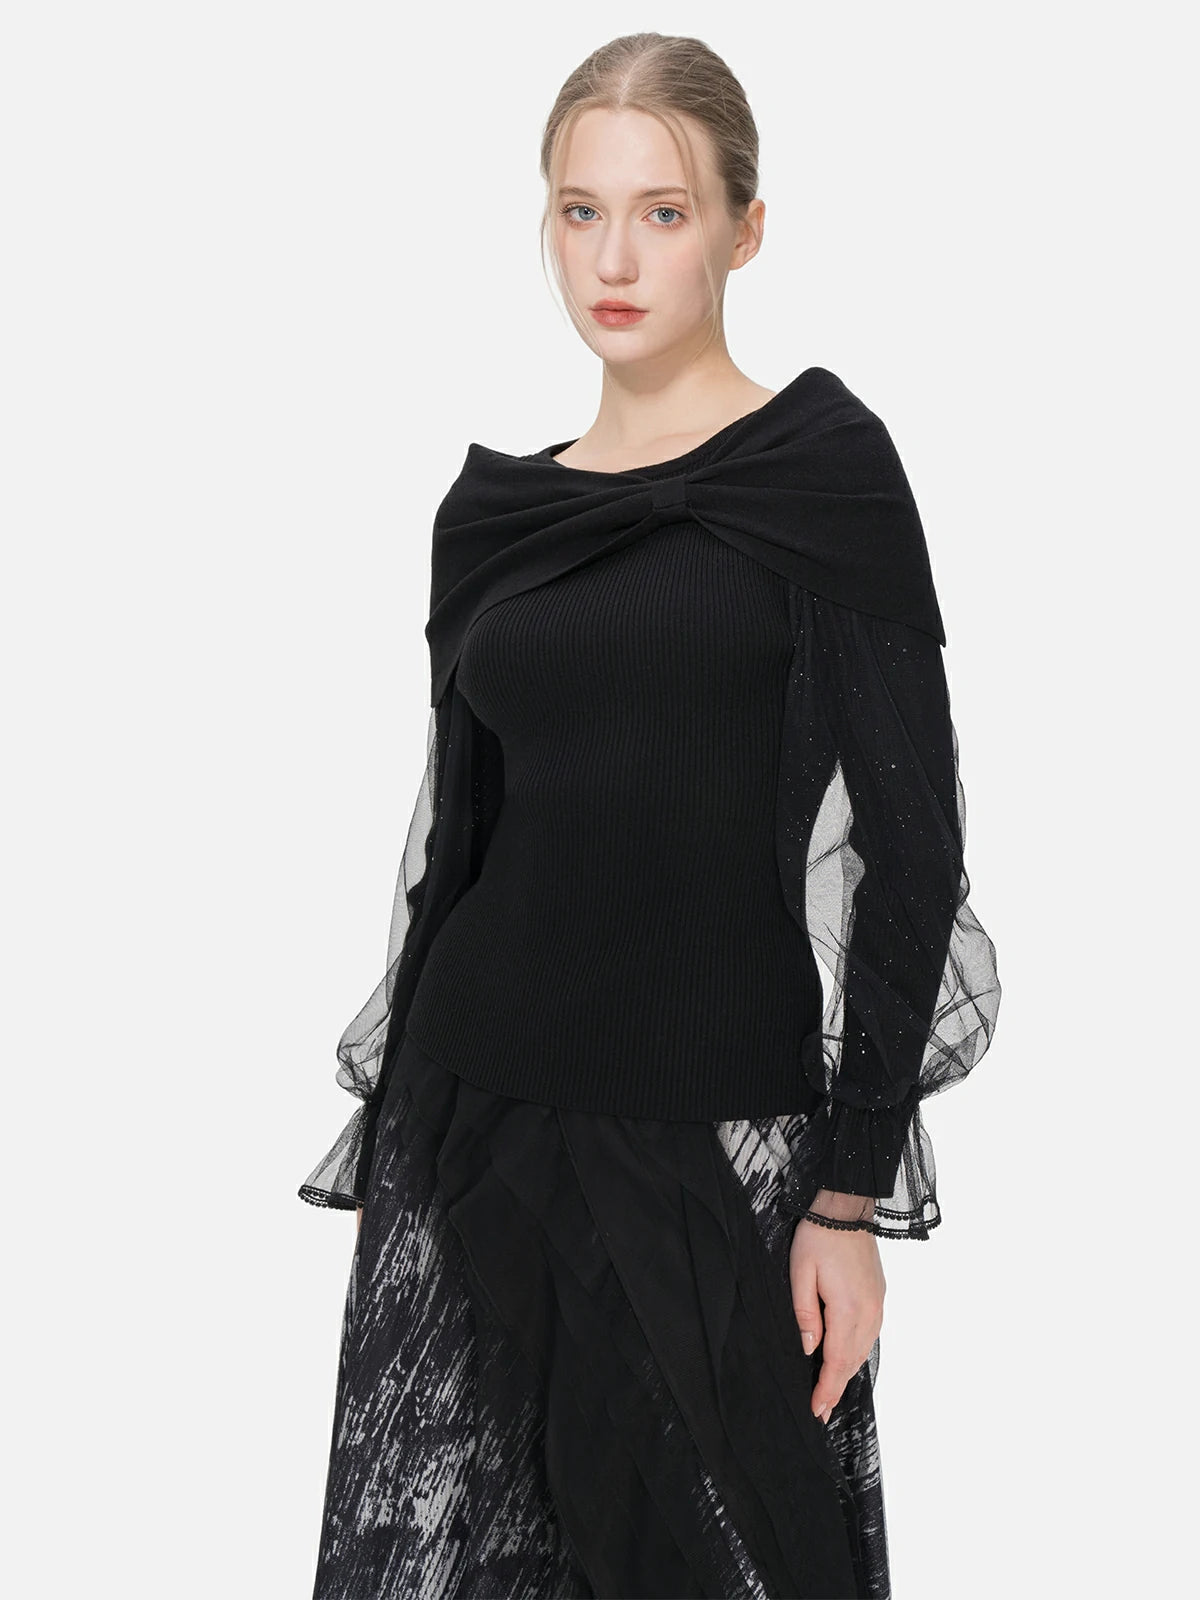 Feminine charm is embodied in this fitted sweater with a one-shoulder bow shawl and splice tulle sleeves, creating an elegant and sophisticated look.